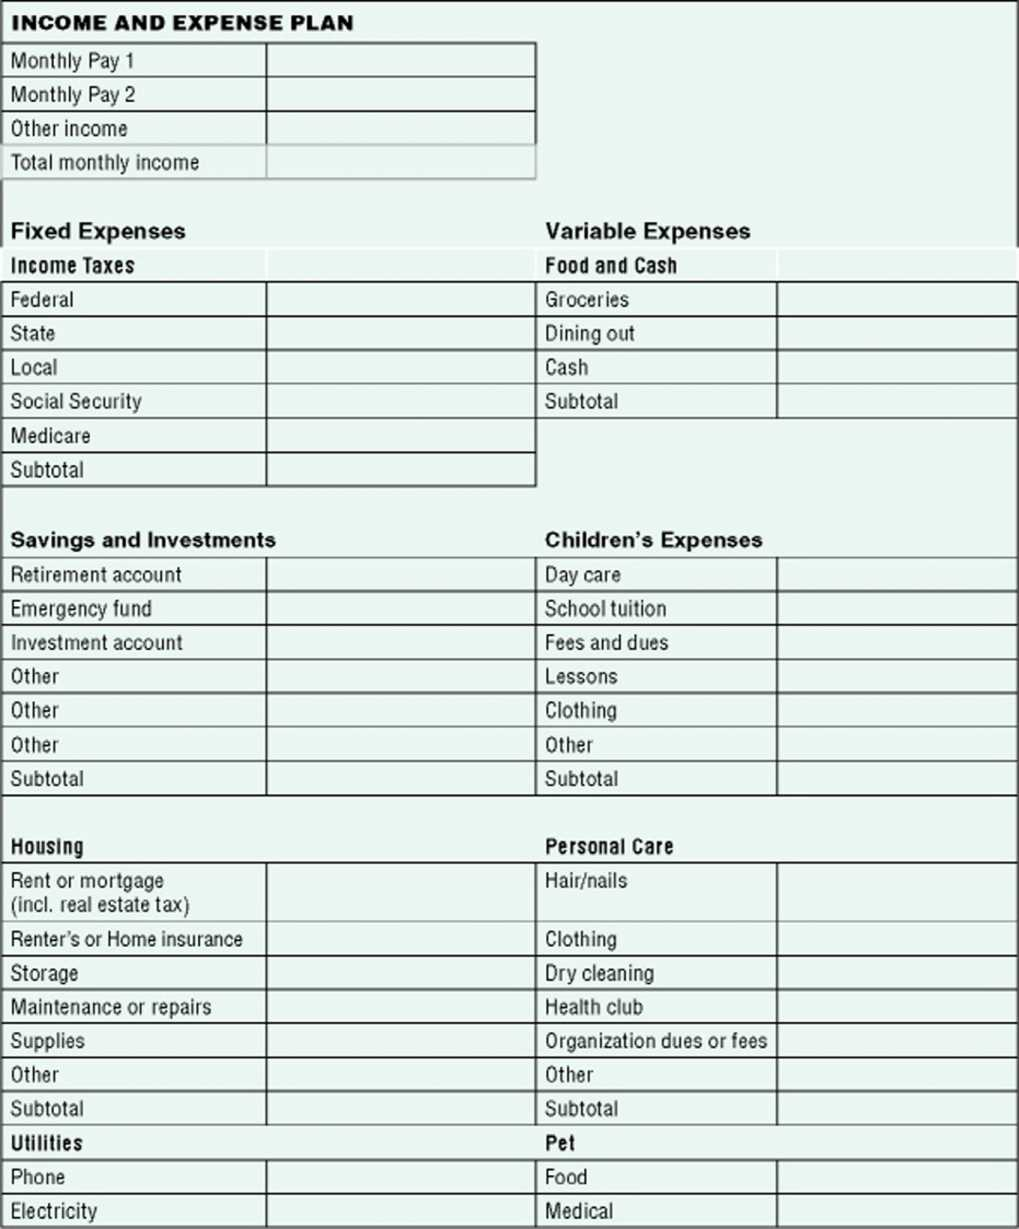 Basic Accounting Spreadsheet Simple Accounting Spreadsheet Awesome with Simple Accounting Spreadsheet